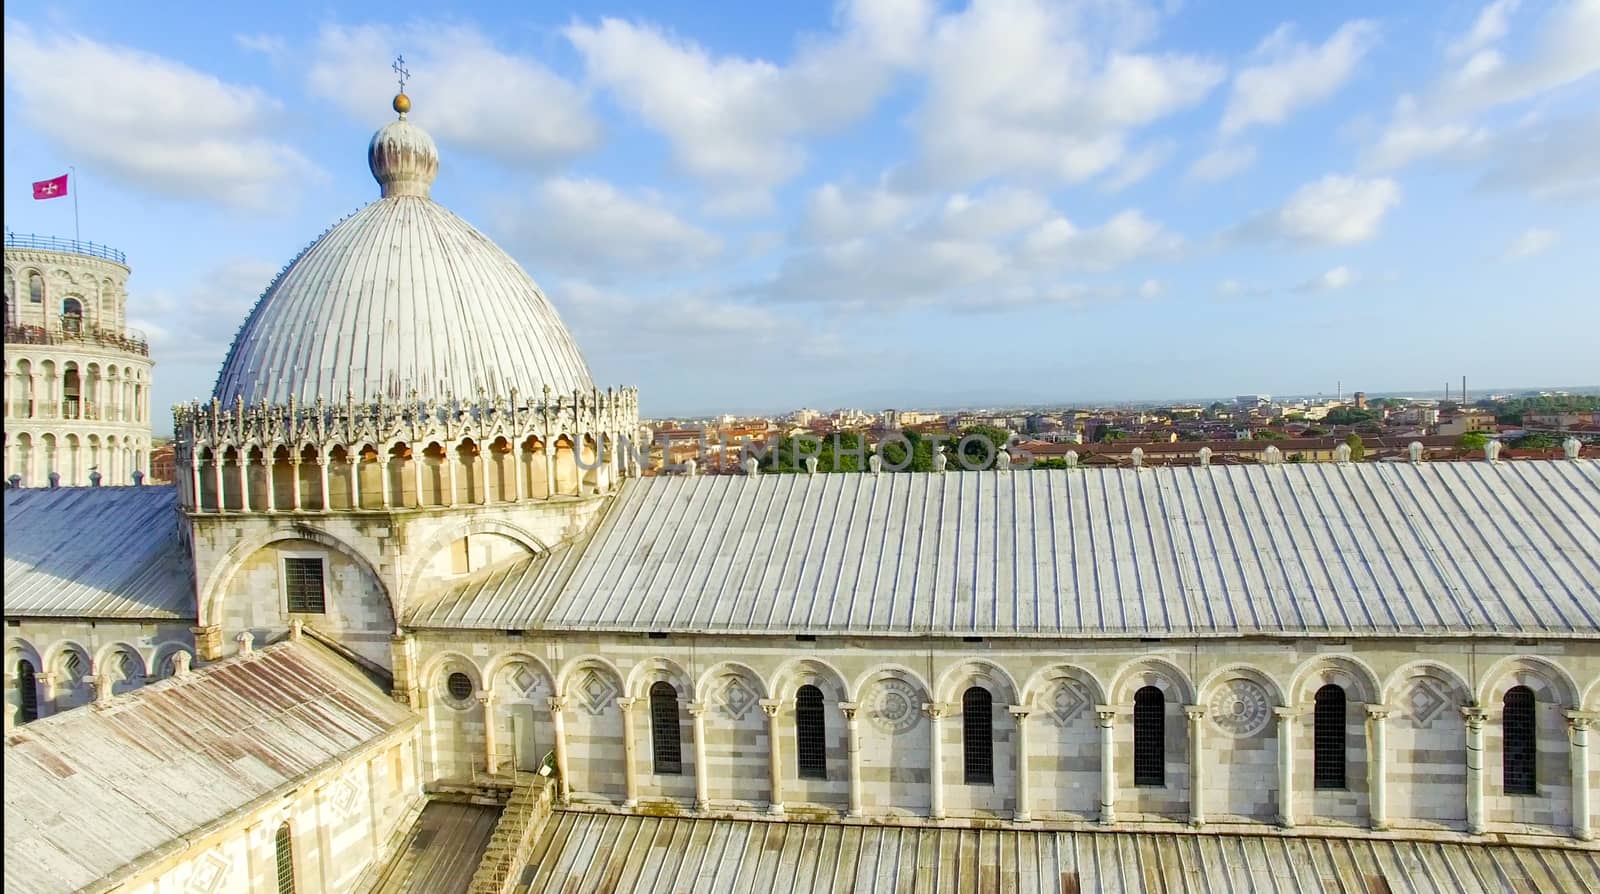 Pisa. Aerial view of Cathedral in Square of Miracles.